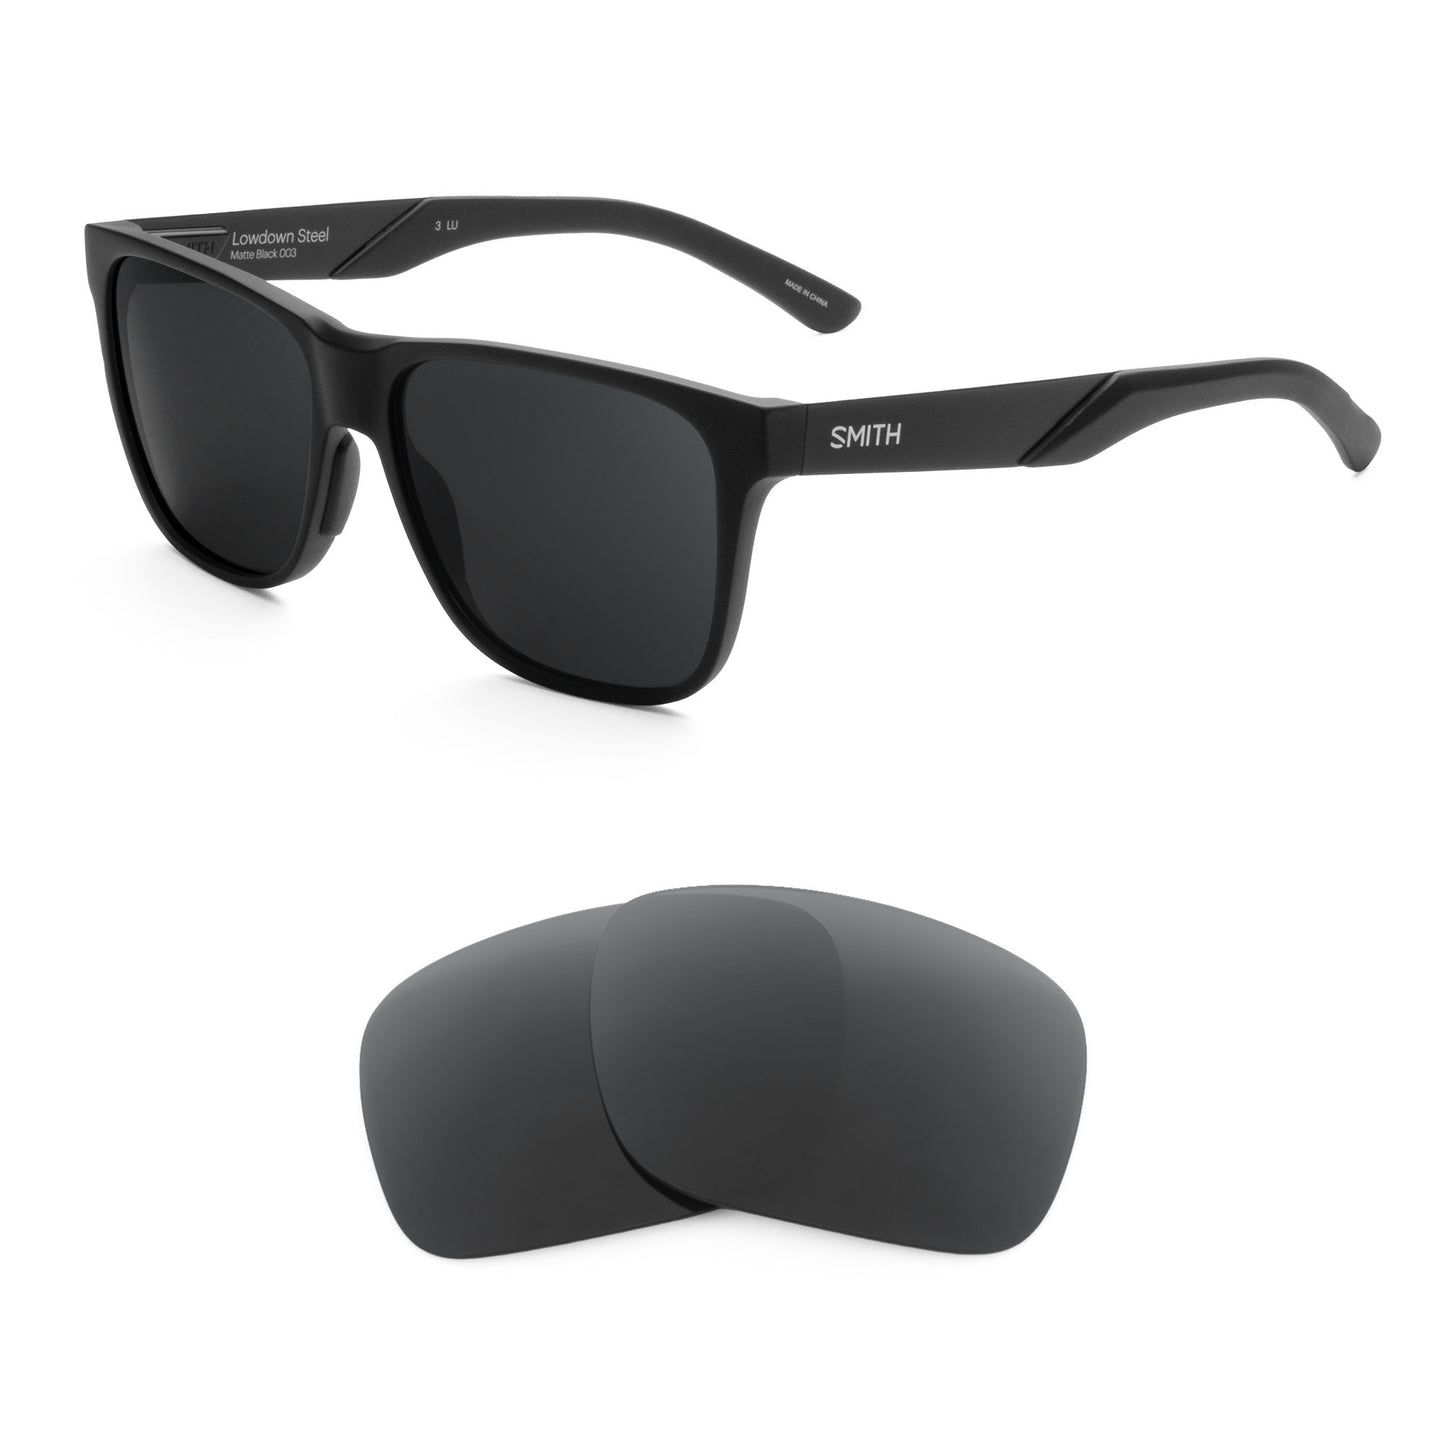 Smith Lowdown Steel sunglasses with replacement lenses